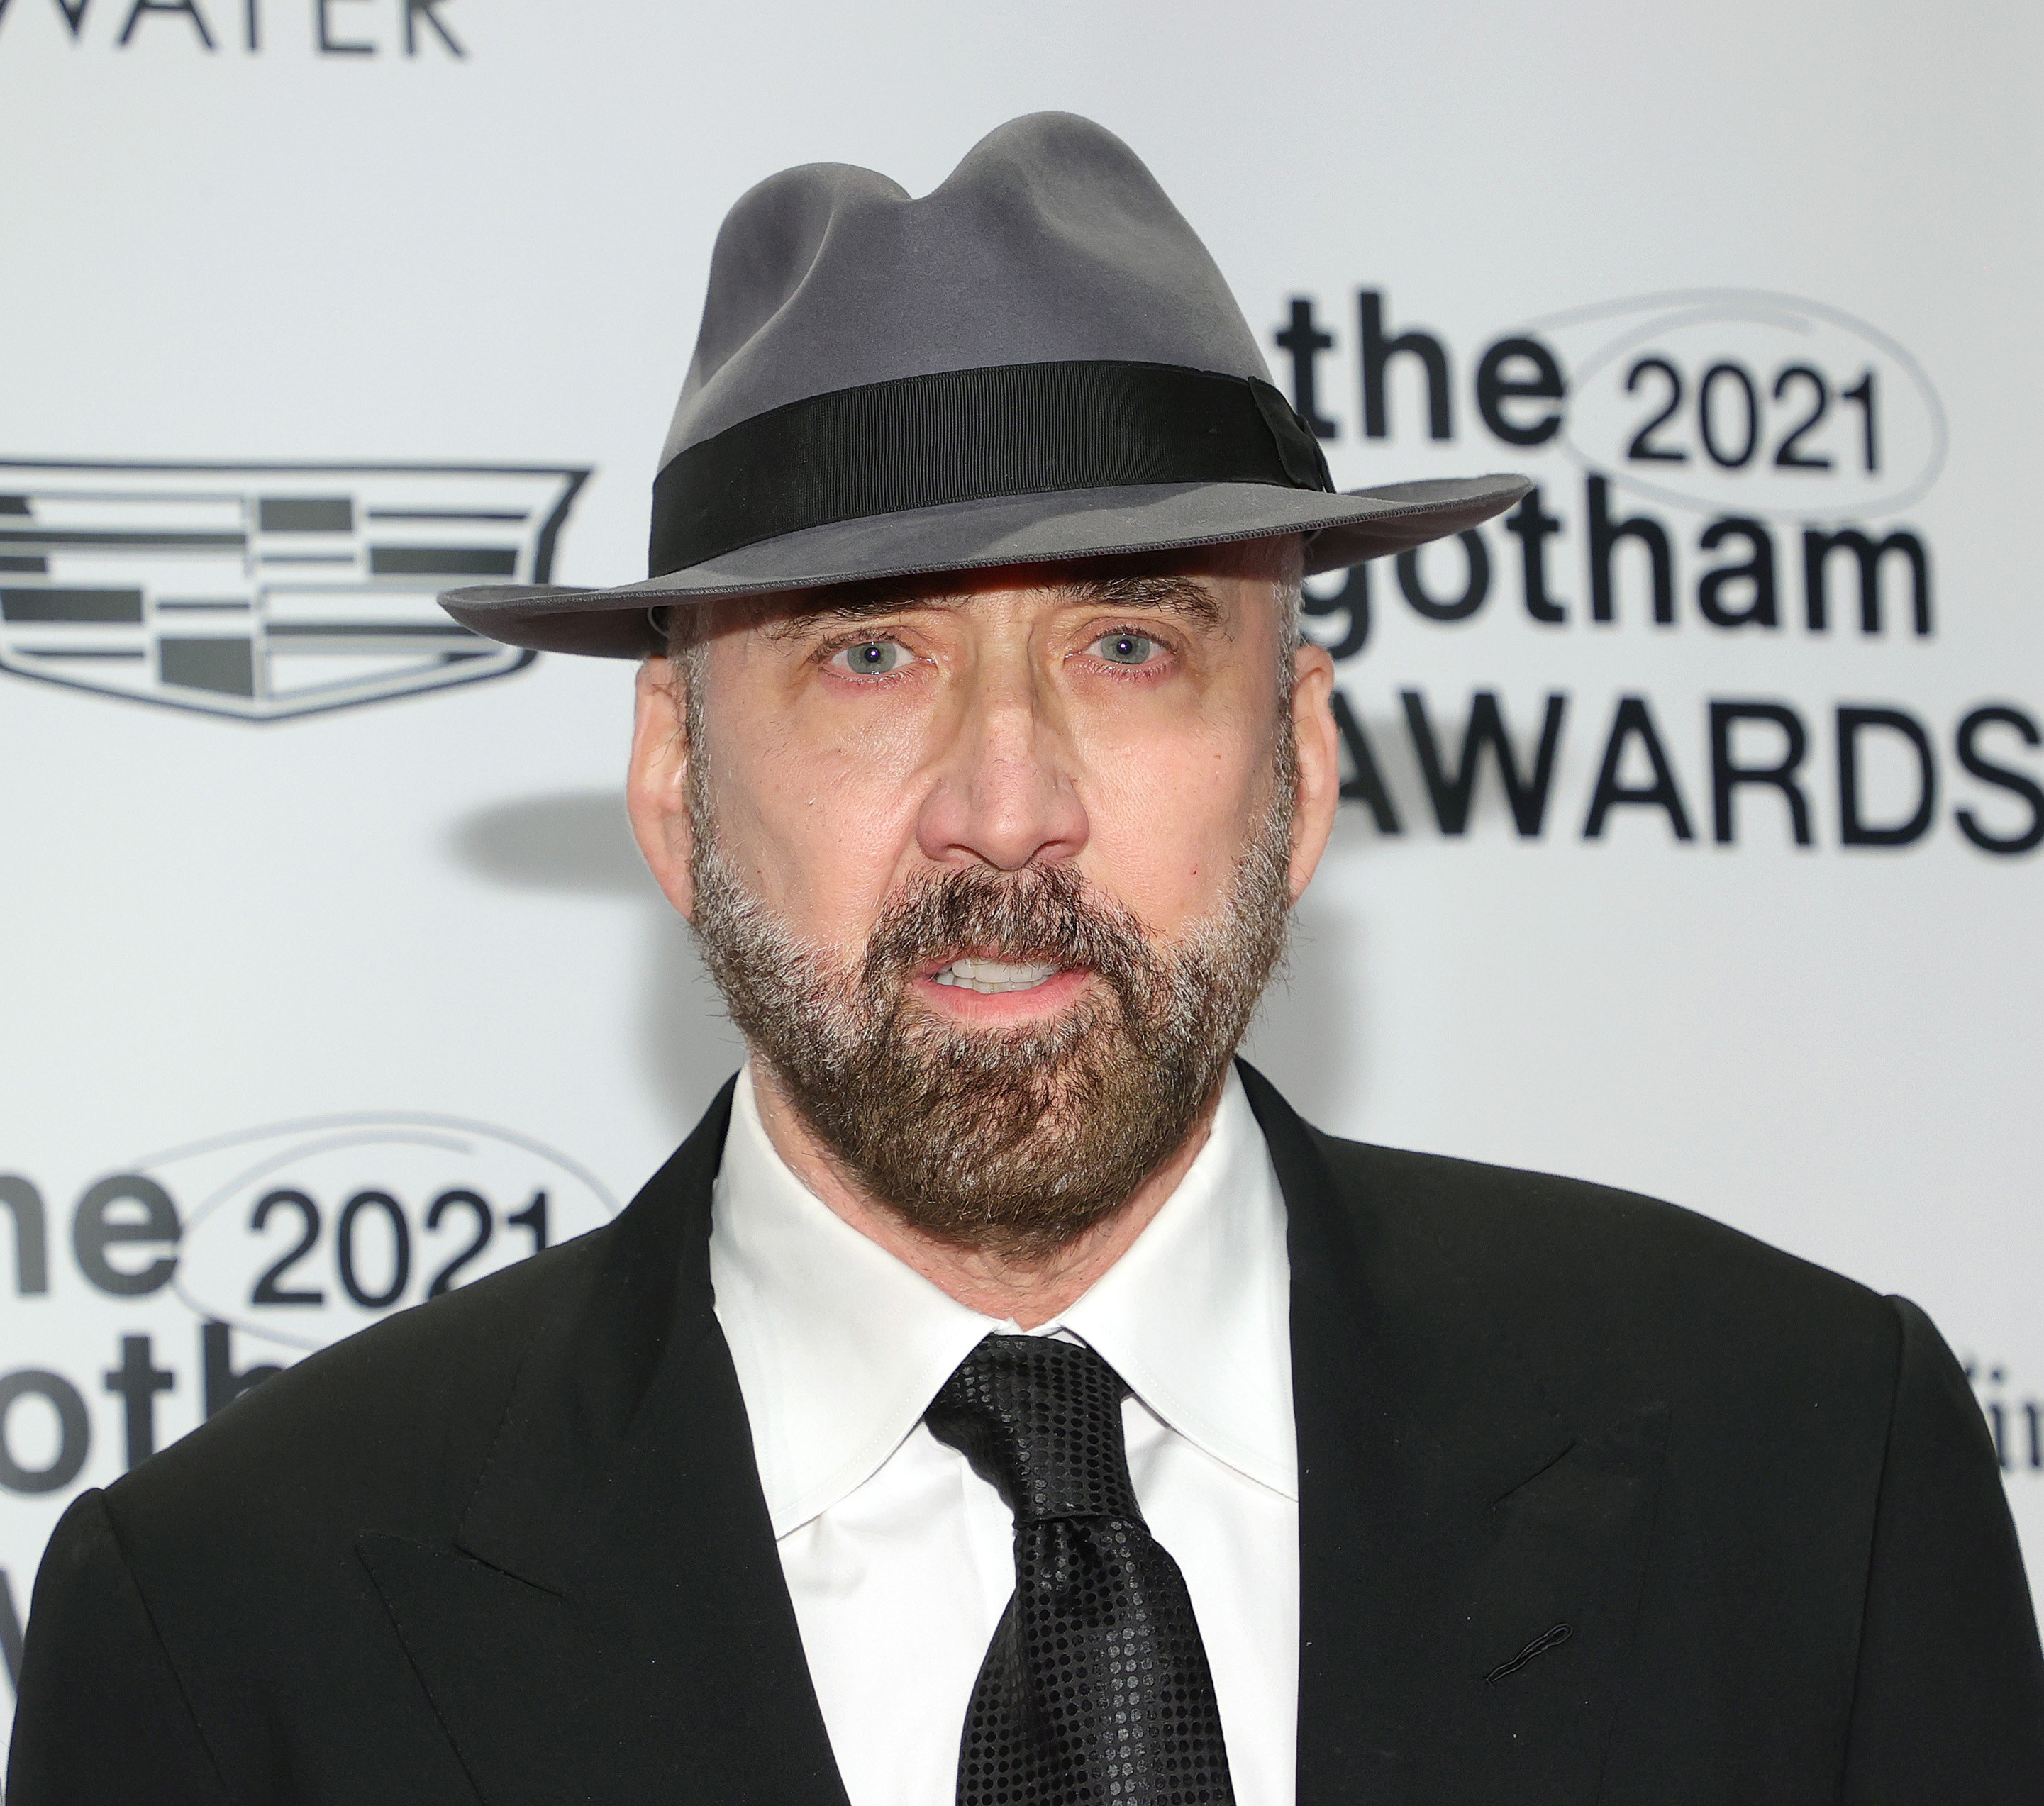 Nicolas Cage wearing a broad fedora and black-and-white suit on the red carpet for the Gotham Awards